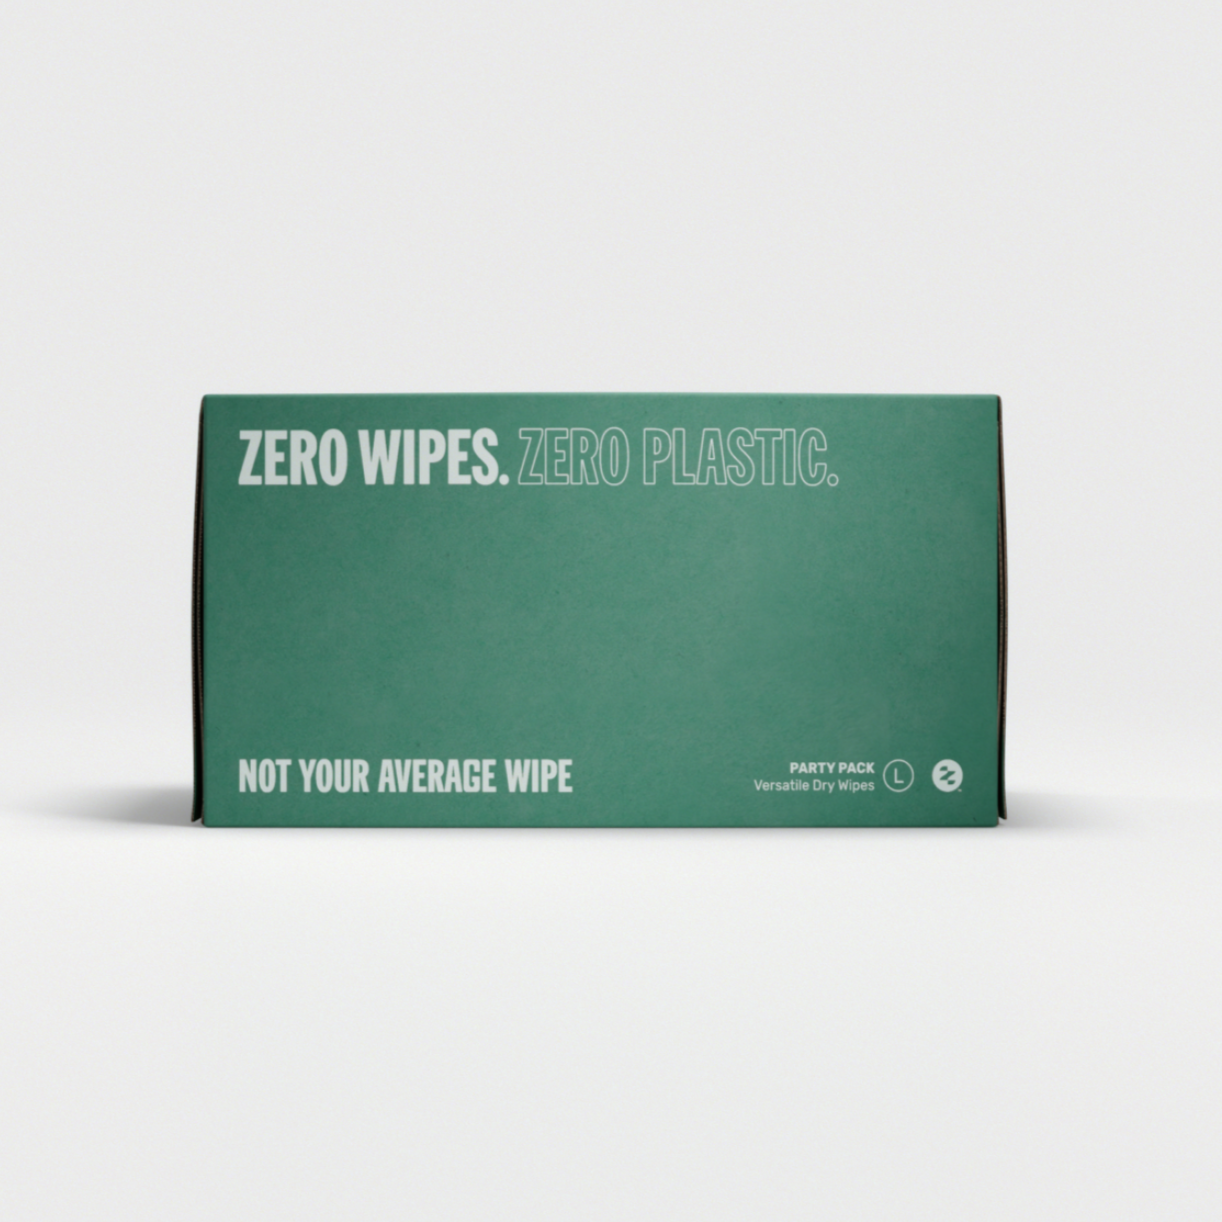 cleaning dry wipes, dry cleaning wipe, organic cleaning wipe, dry cleaning cloth, reusable cleaning cloth, Australian cleaning products, biodegradable cleaning products, sustainable cleaning product, chemical free cleaning products, compostable cleaning product.